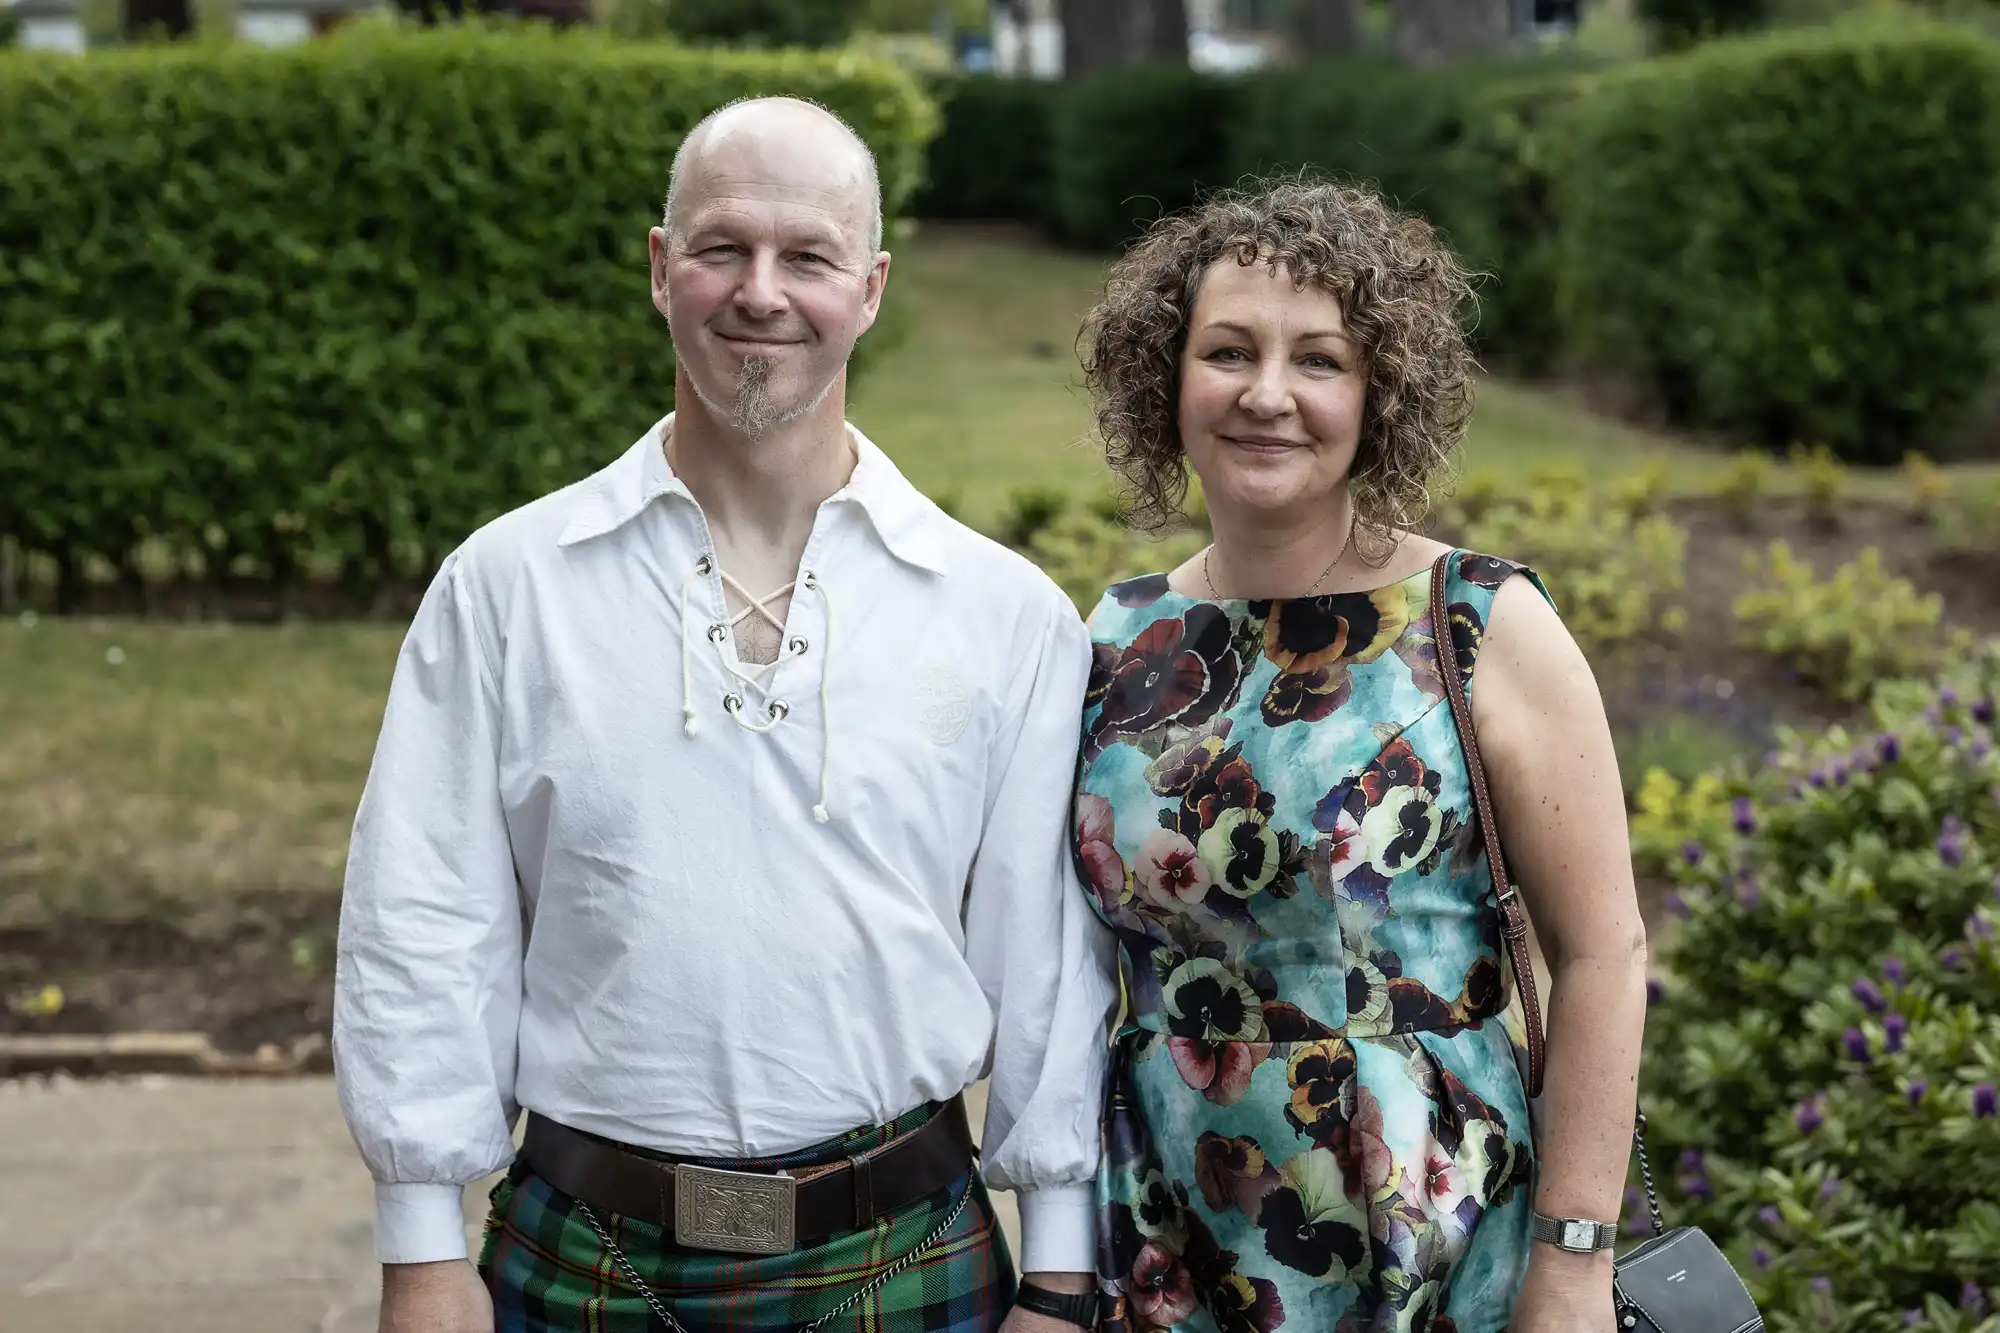 A man in a kilt and a woman in a floral dress standing together in a garden.